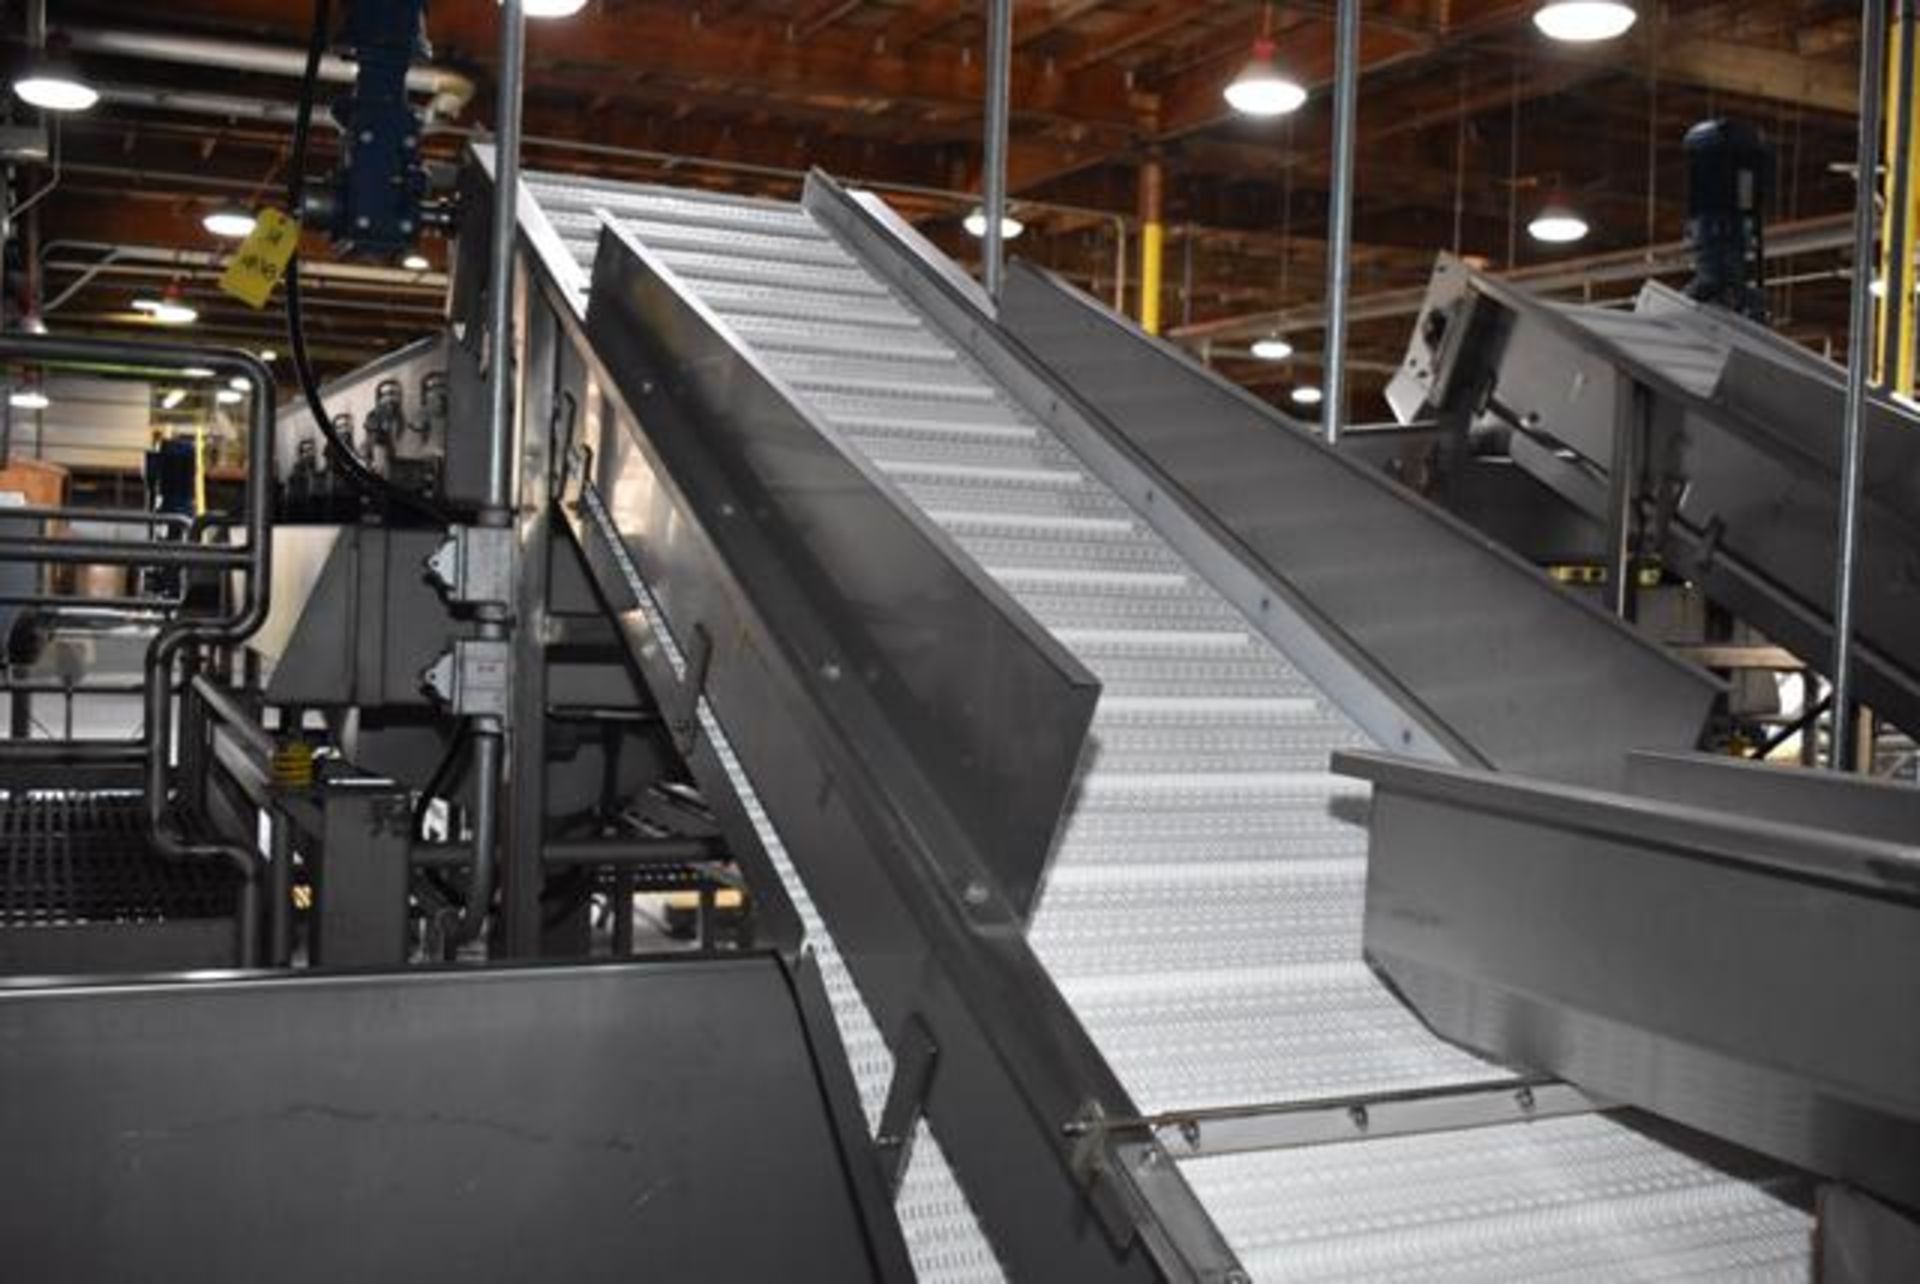 Commercial Incline Conveyor, Pleated, 24" Wide Belt x 8' Length, RIGGING FEE: $200 - Image 2 of 2